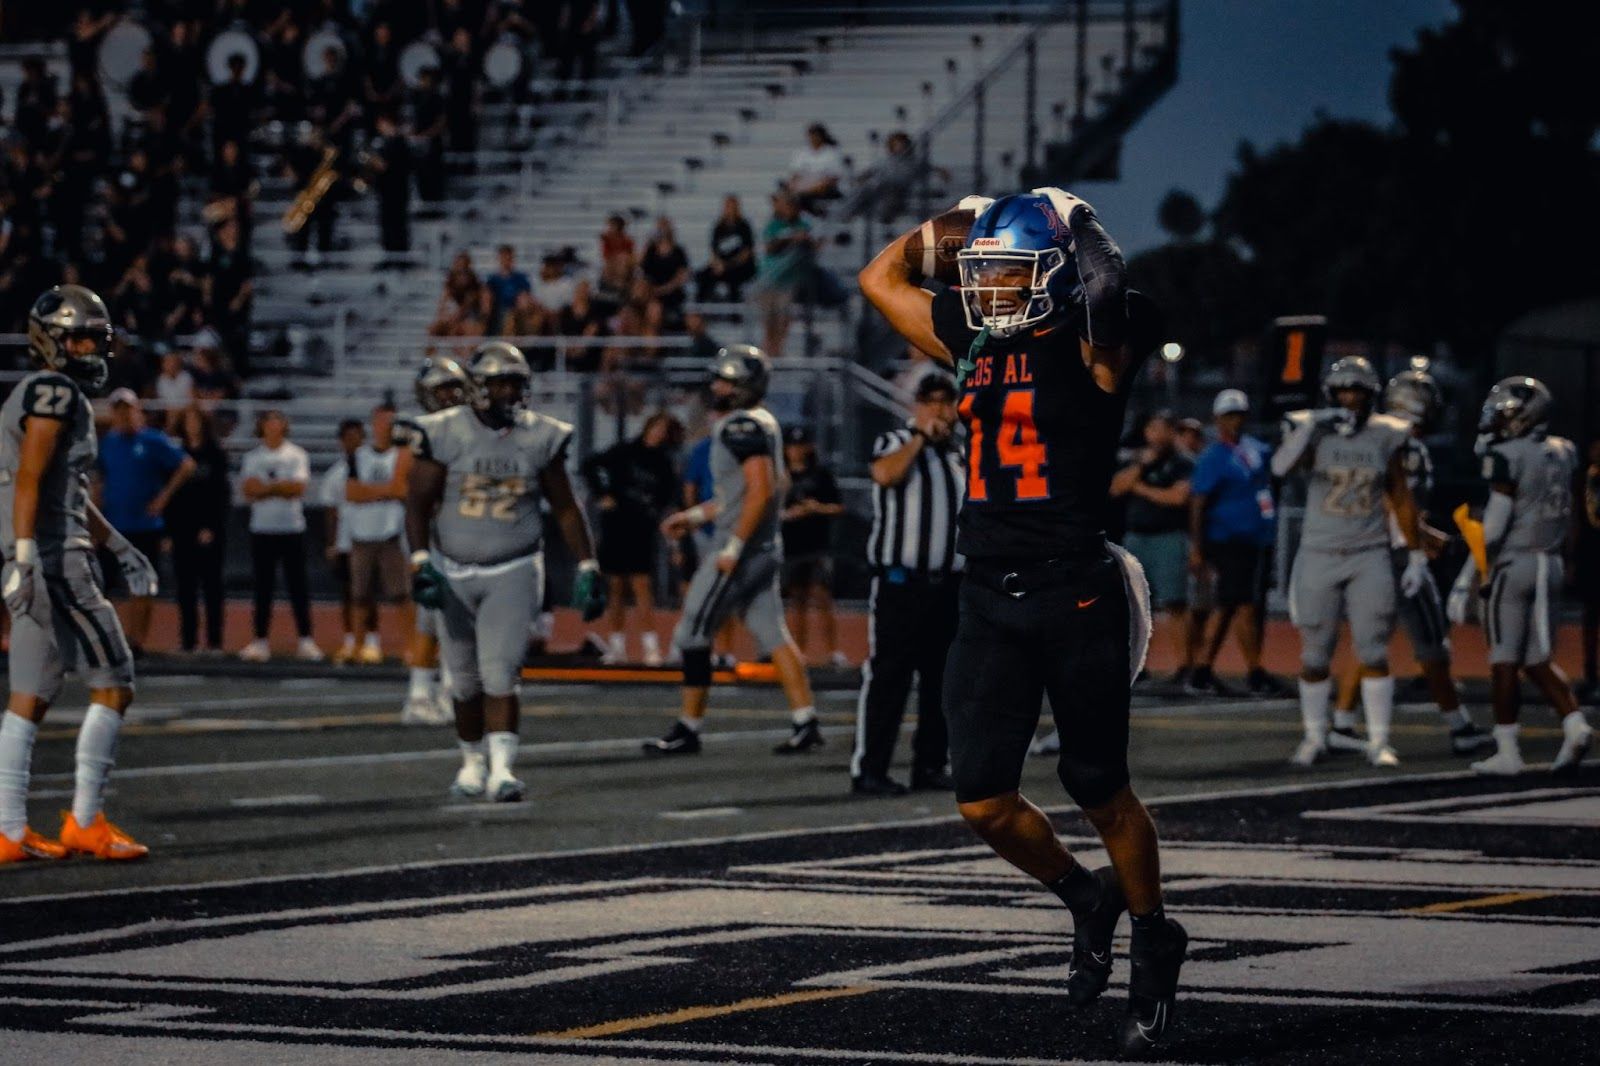 Griffins wide receiver Makai Lemon scored two touchdowns in the Sept. 3 loss to Basha before being ejected for two unsportsmanlike conduct penalties. Photo by Marja Bene